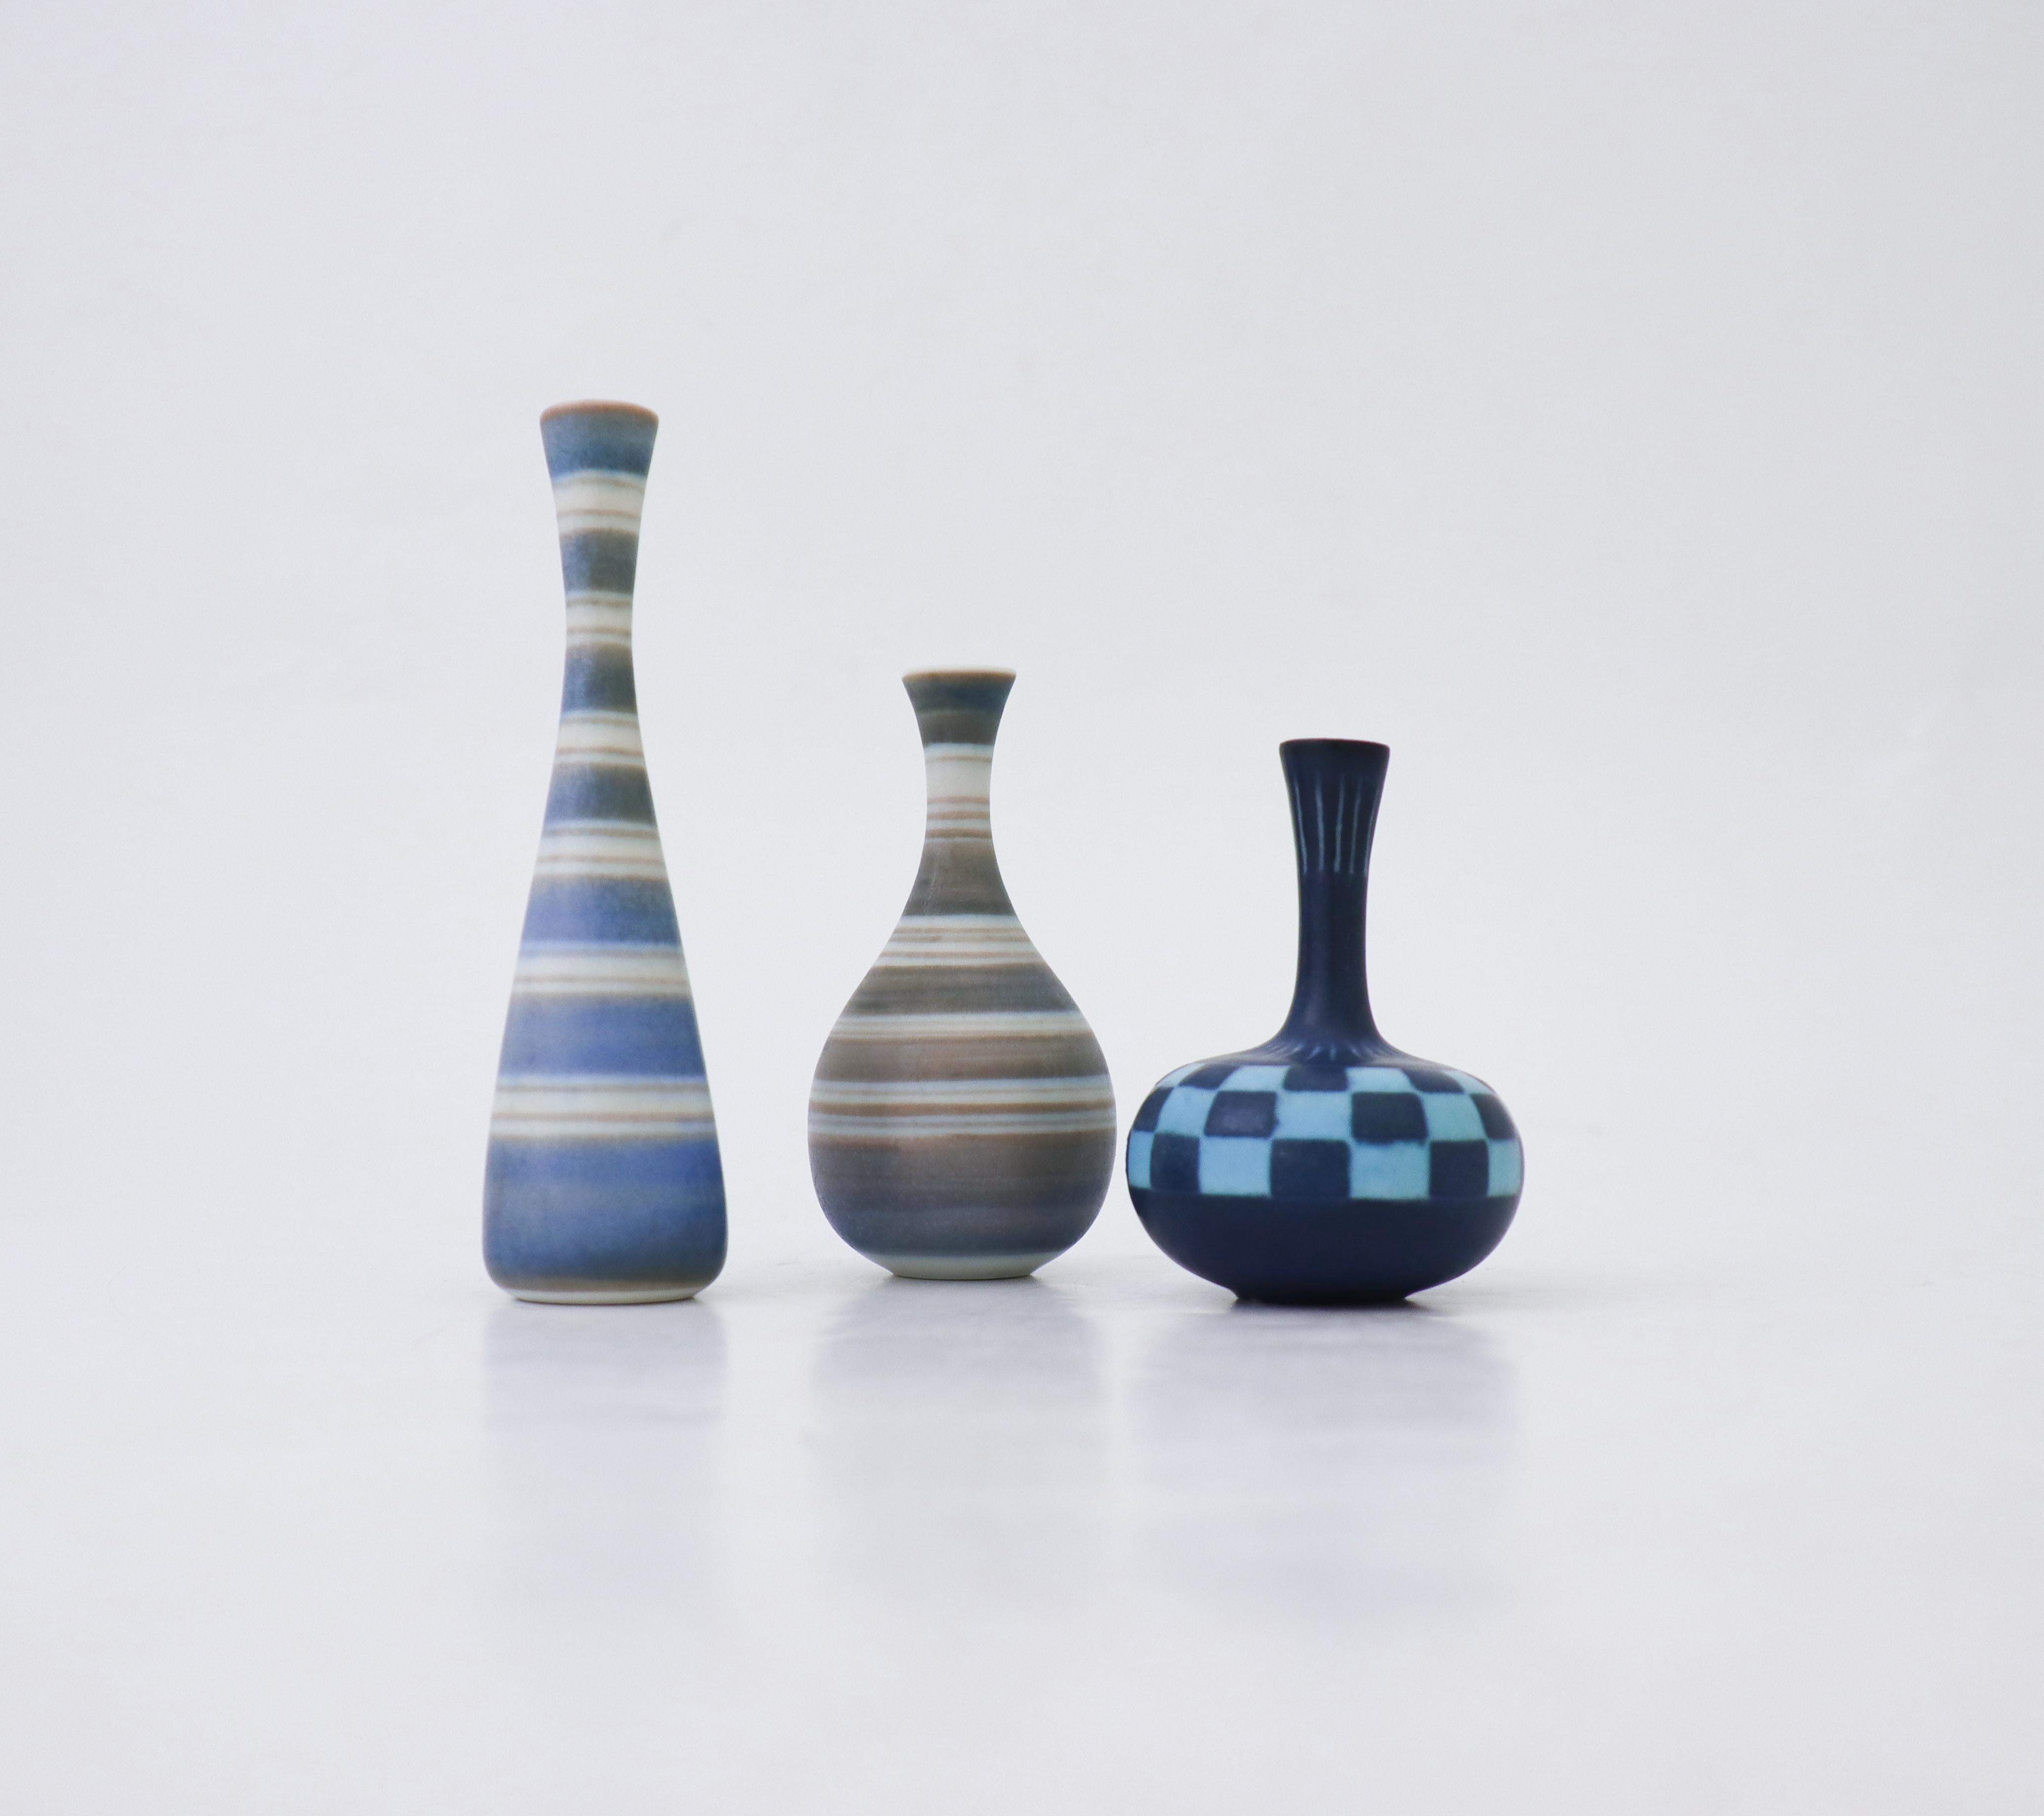 A set of three vases with a graphical pattern designed by Gunnar Nylund at Rörstrand. The vases are 12,5 cm, 9,5 cm and 8 cm high. They are all in excellent condition and marked as 1st quality. 

Gunnar Nylund was born in Paris 1904 with parents who